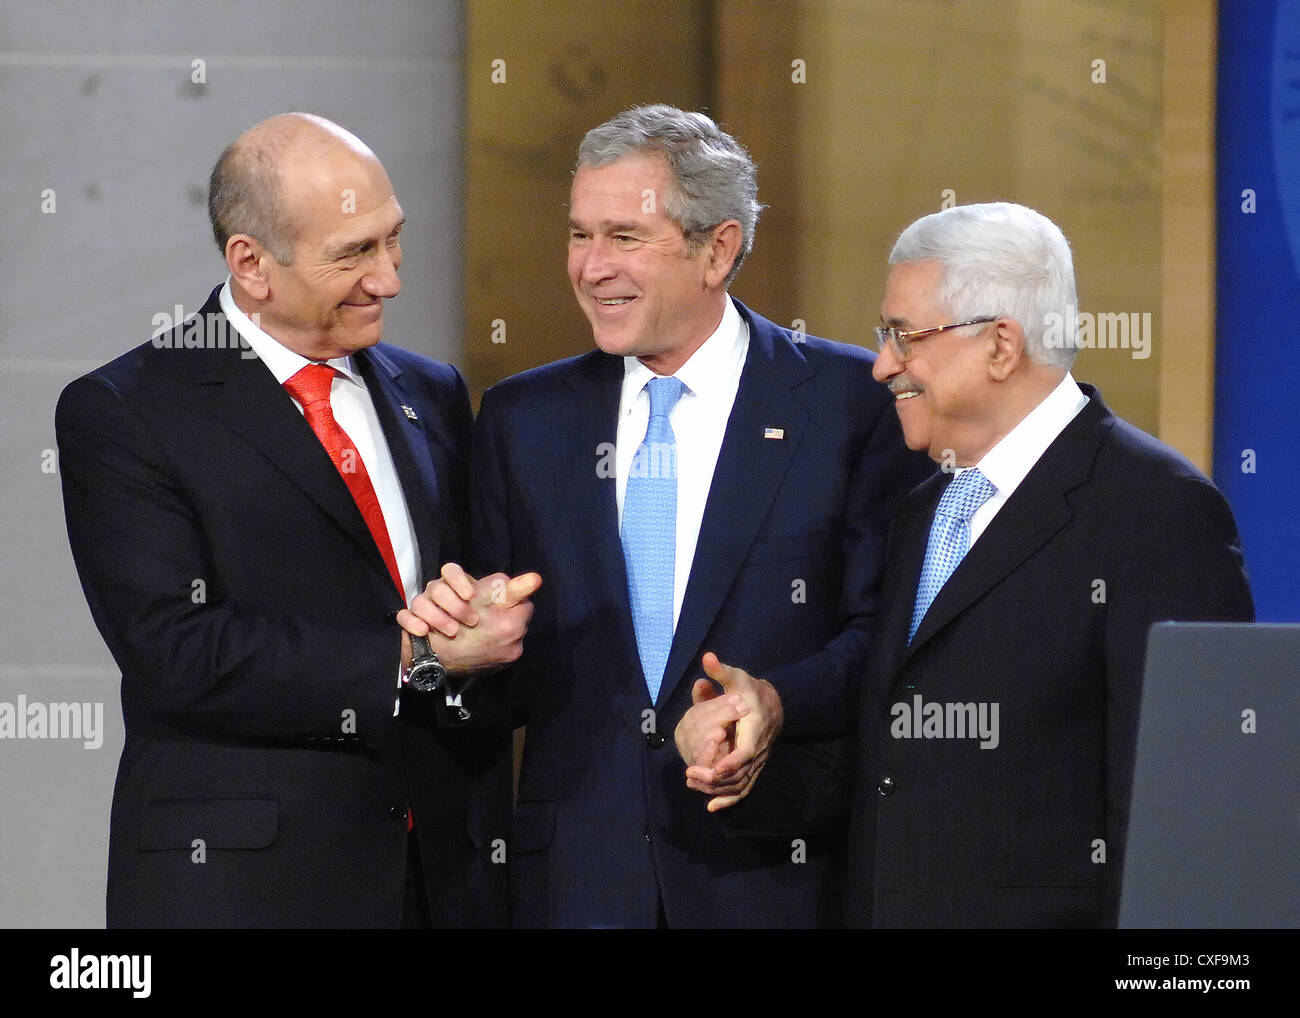 US President George W. Bush shakes hands with Israeli Prime Minister Ehud Omert (L) and Palestinian President Mahmoud Abbas following his address at the Annapolis Conference November 27, 2006 in Annapolis, Maryland. Stock Photo